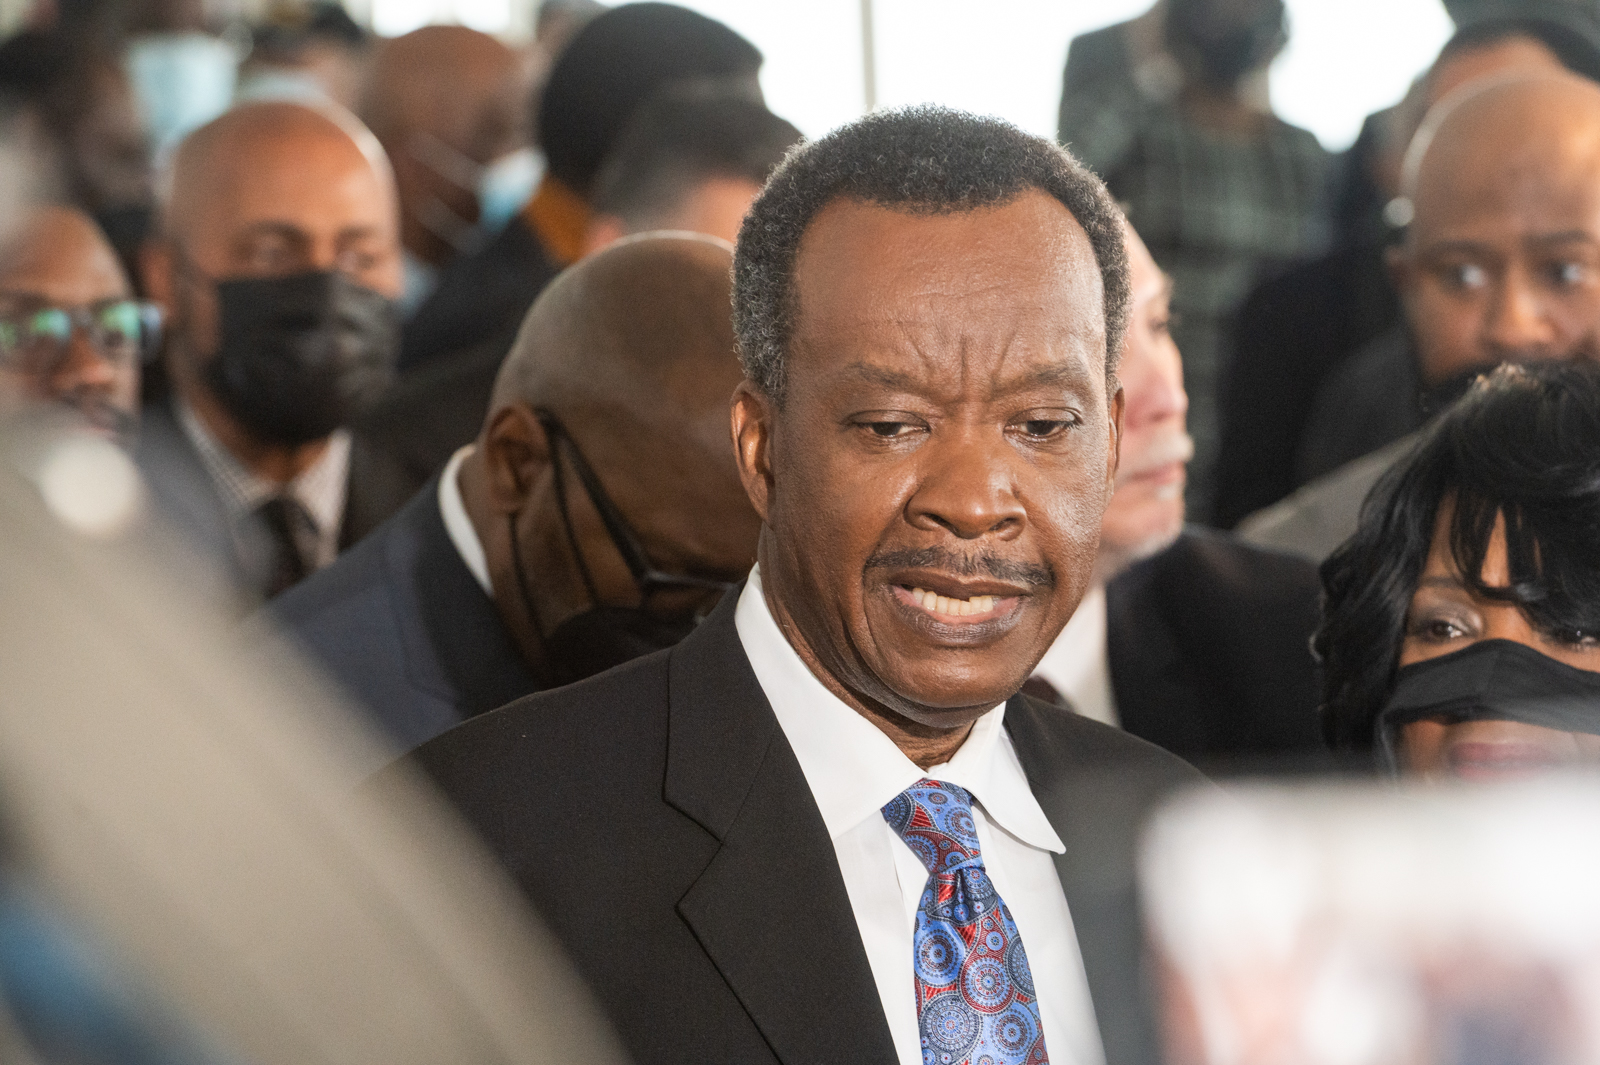 Who is Willie Wilson and how did he become a millionaire?